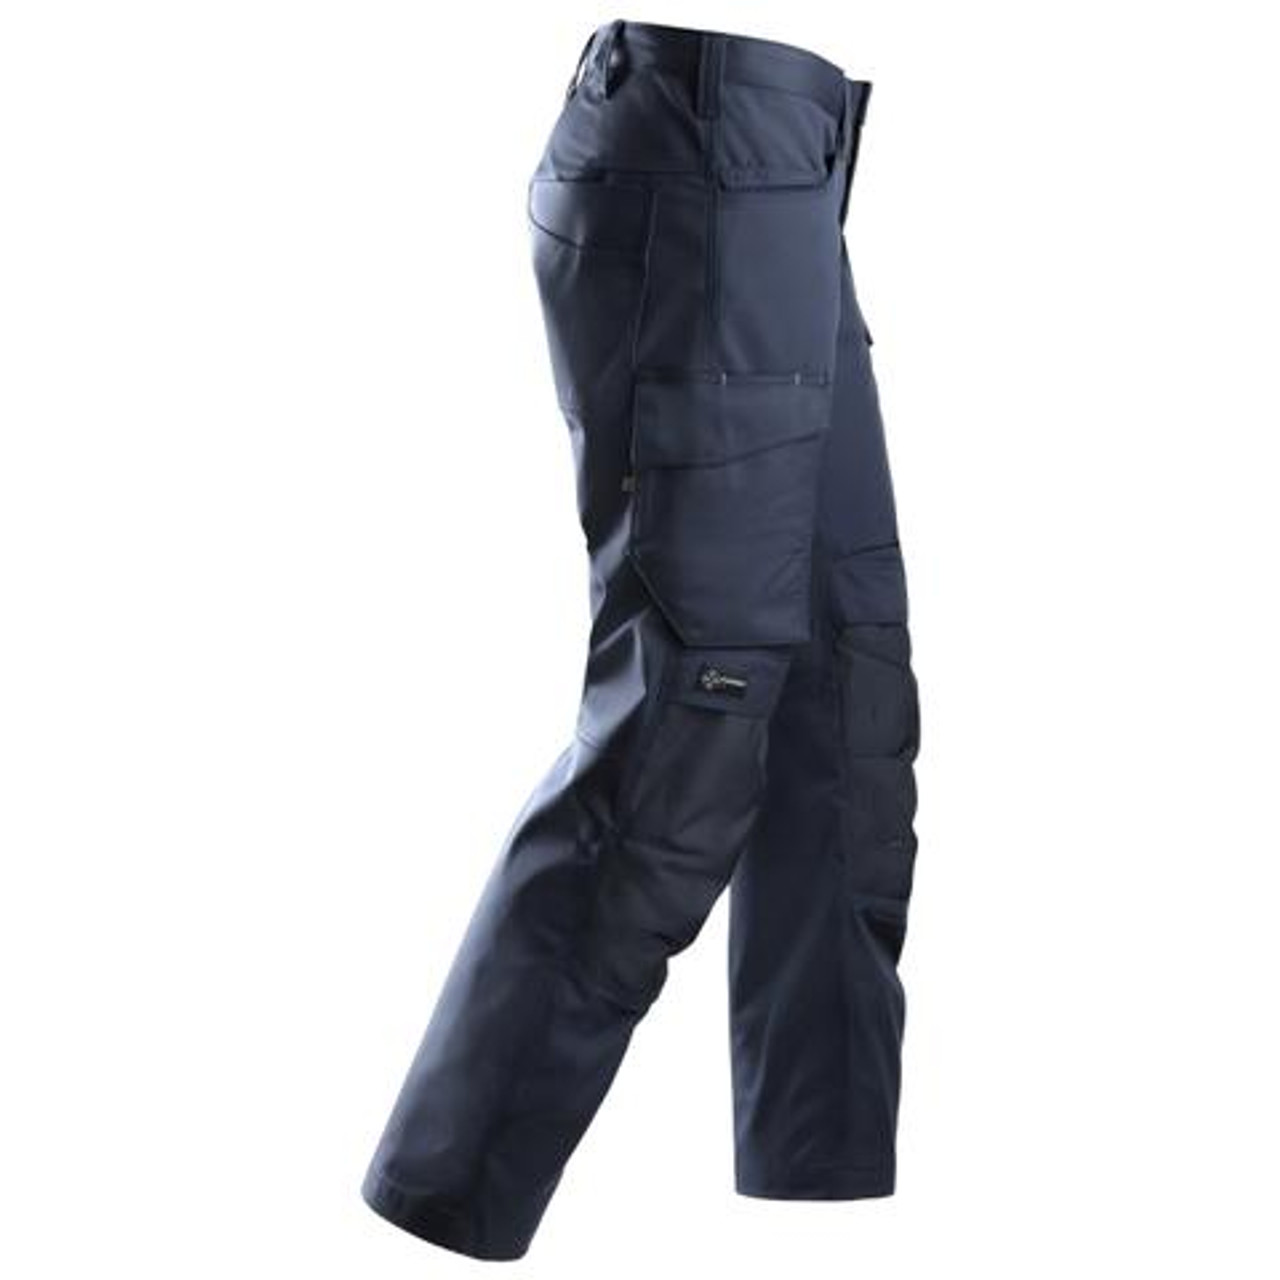 Buy online in Australia, New Zealand and Canada SNICKERS Cordura Navy Blue Trousers for Electricians that have Kneepad Pockets